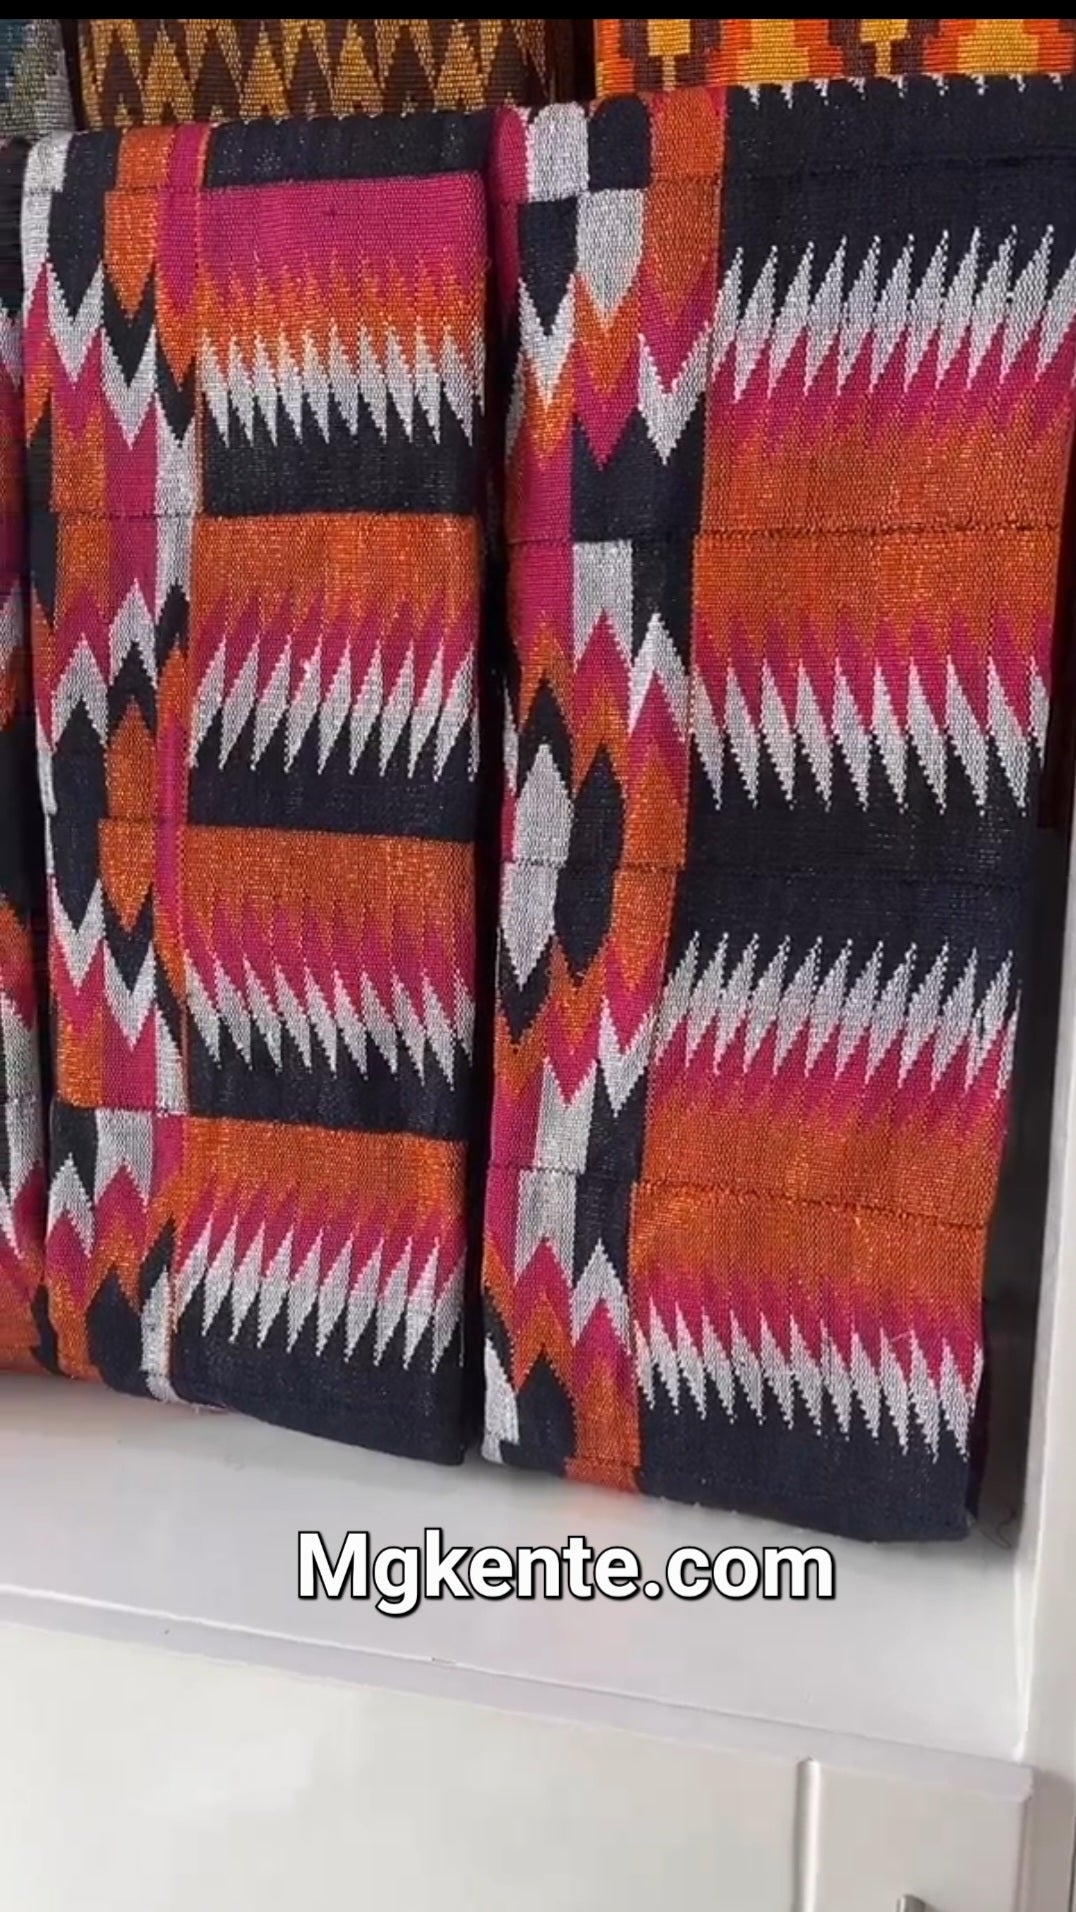 Authentic Hand Weaved Kente Cloth A2546